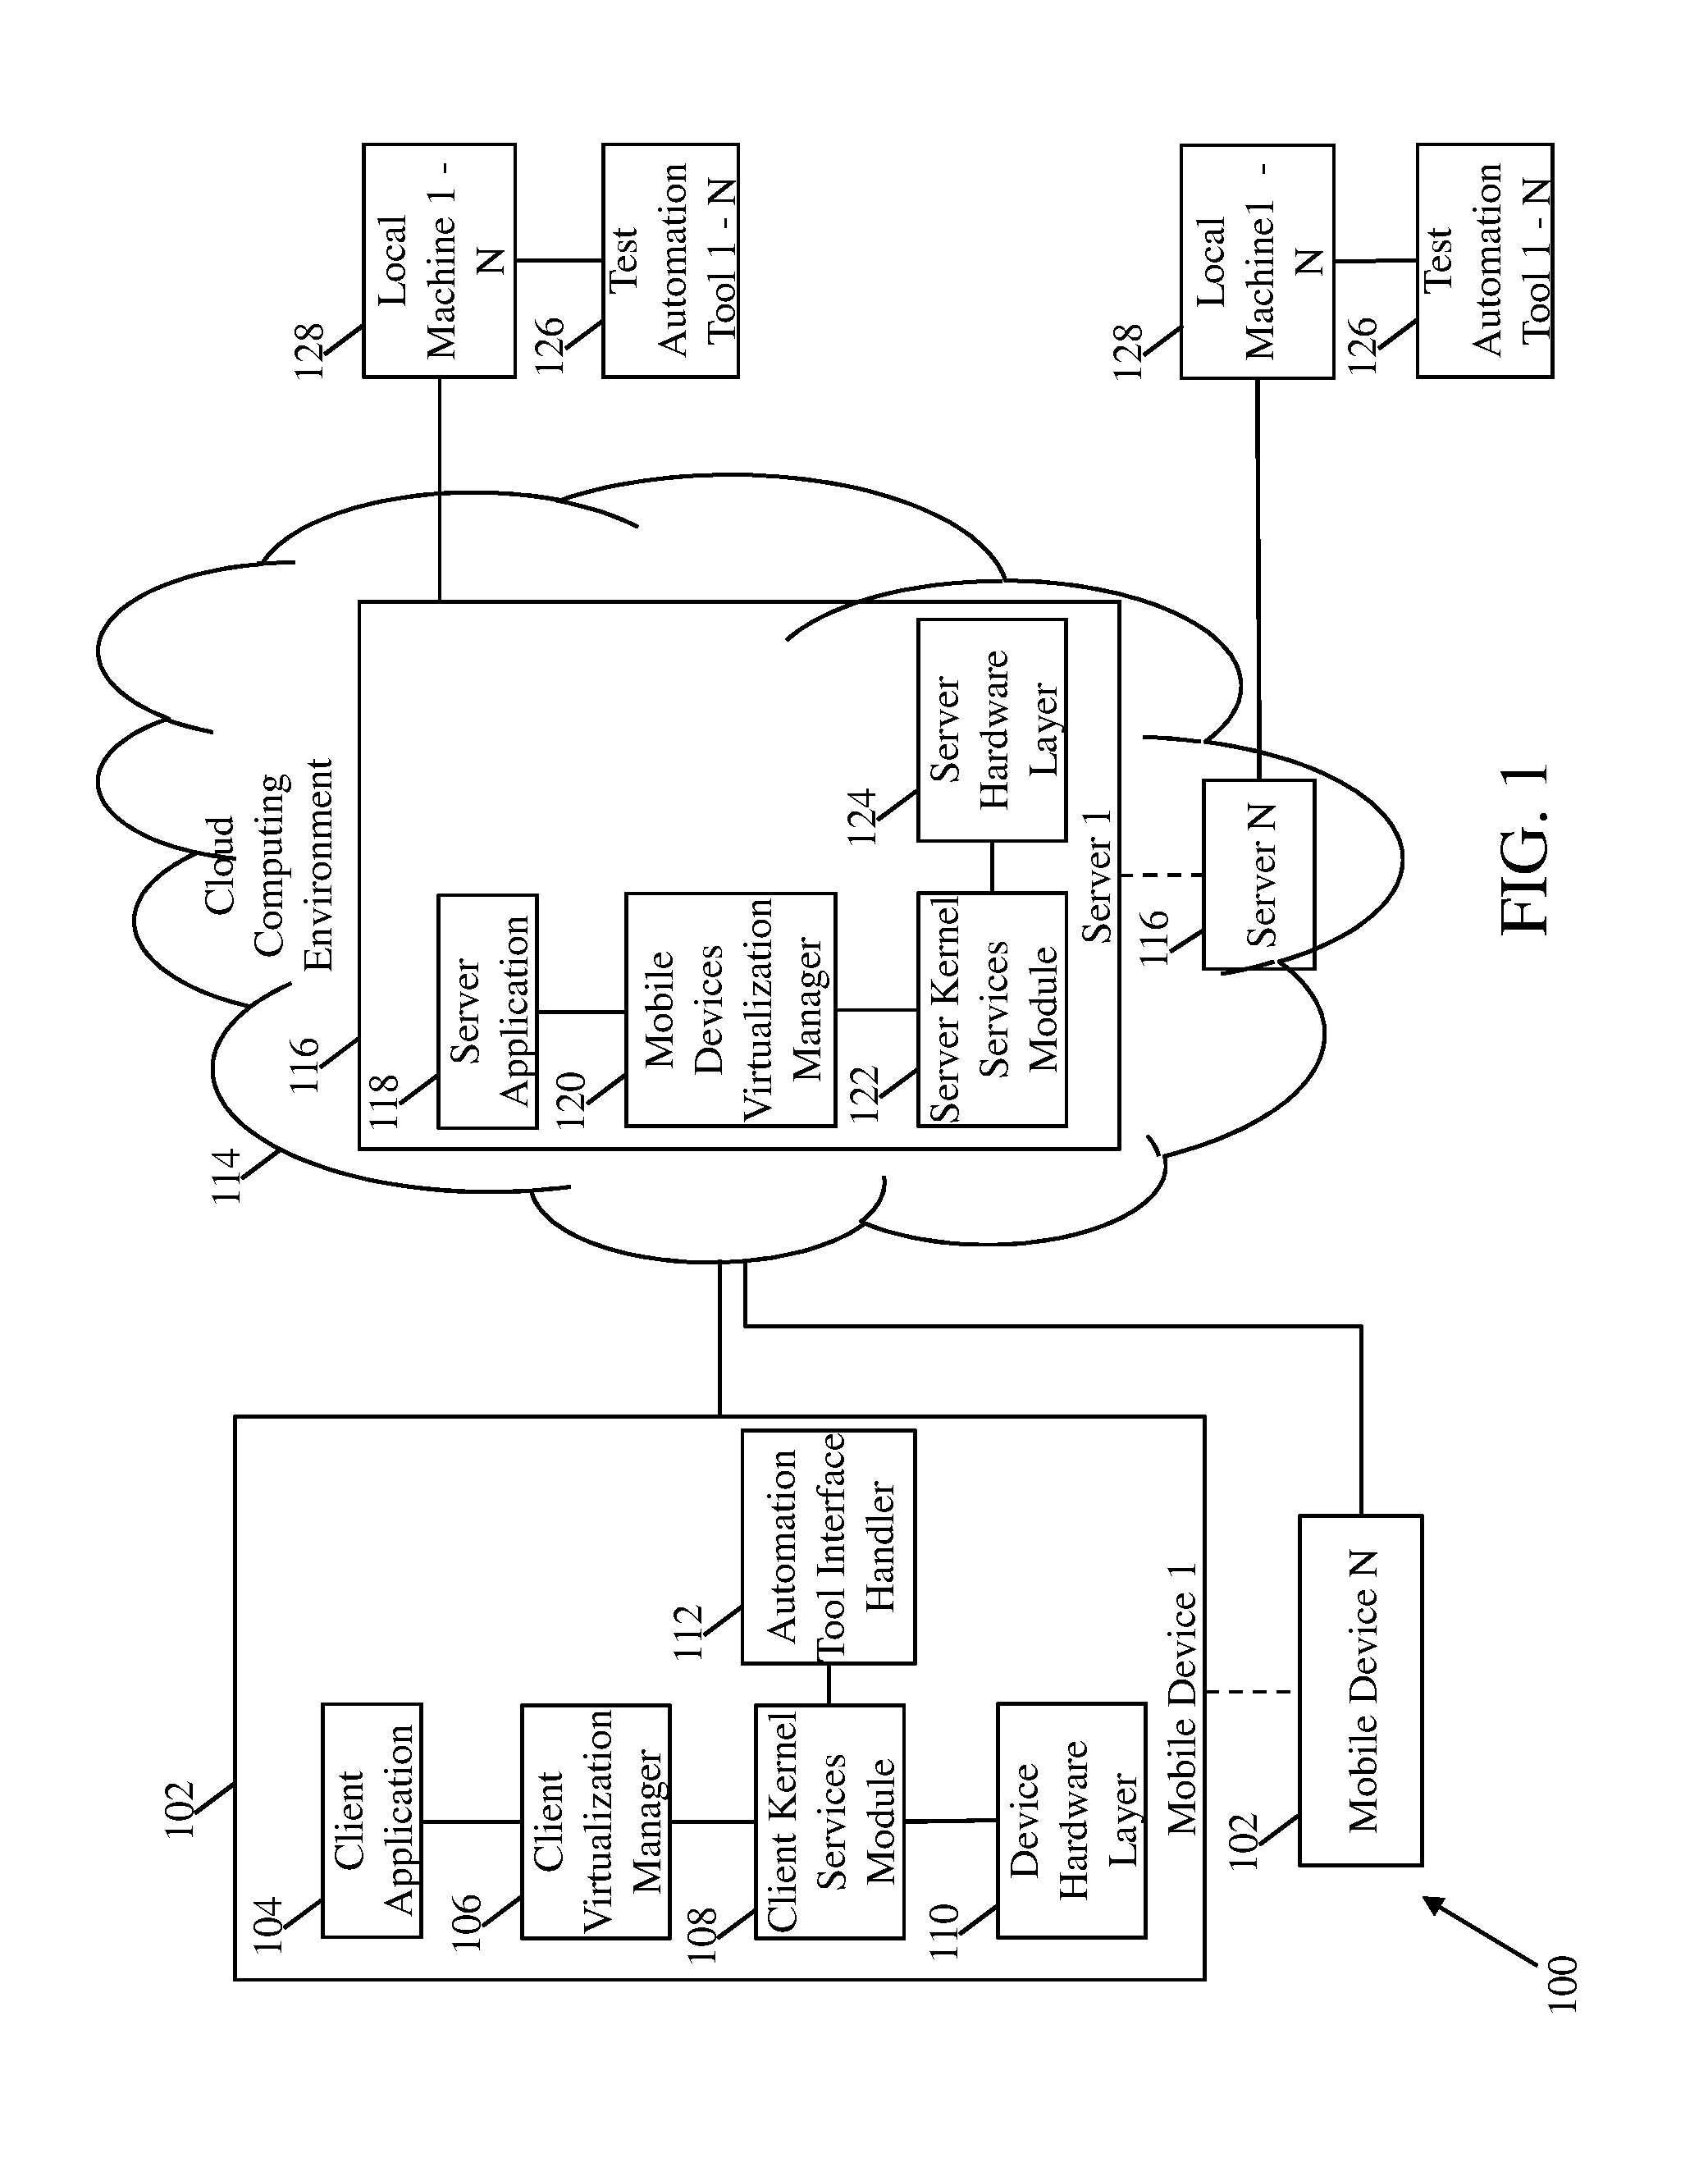 System and method for hosting mobile devices for testing in a cloud computing environment